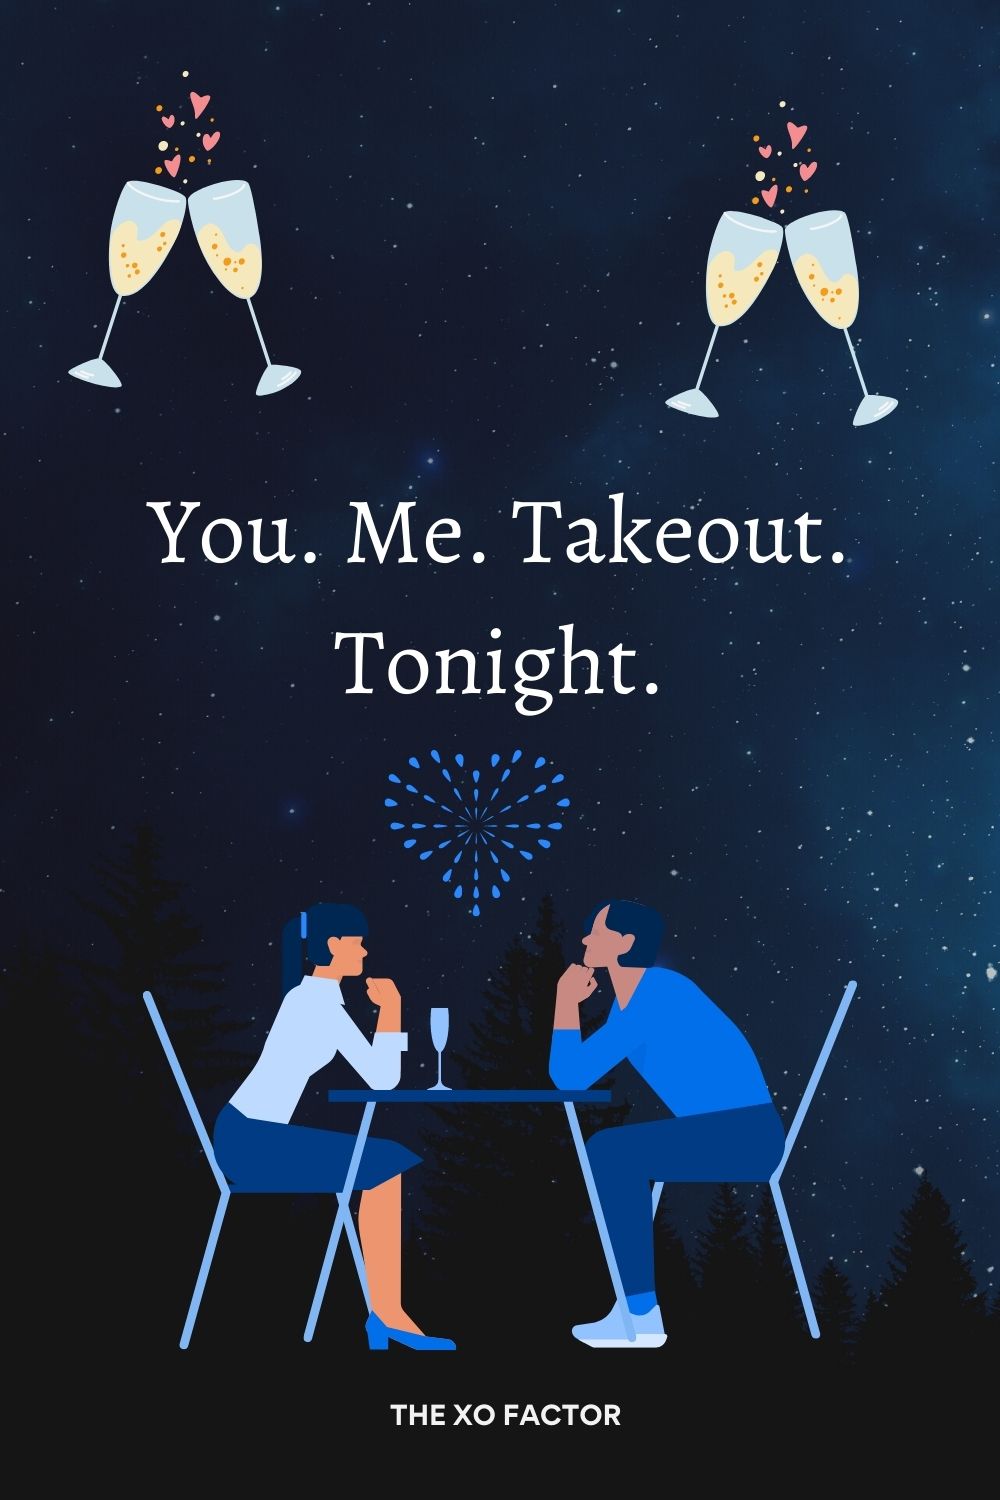 You. Me. Takeout. Tonight.